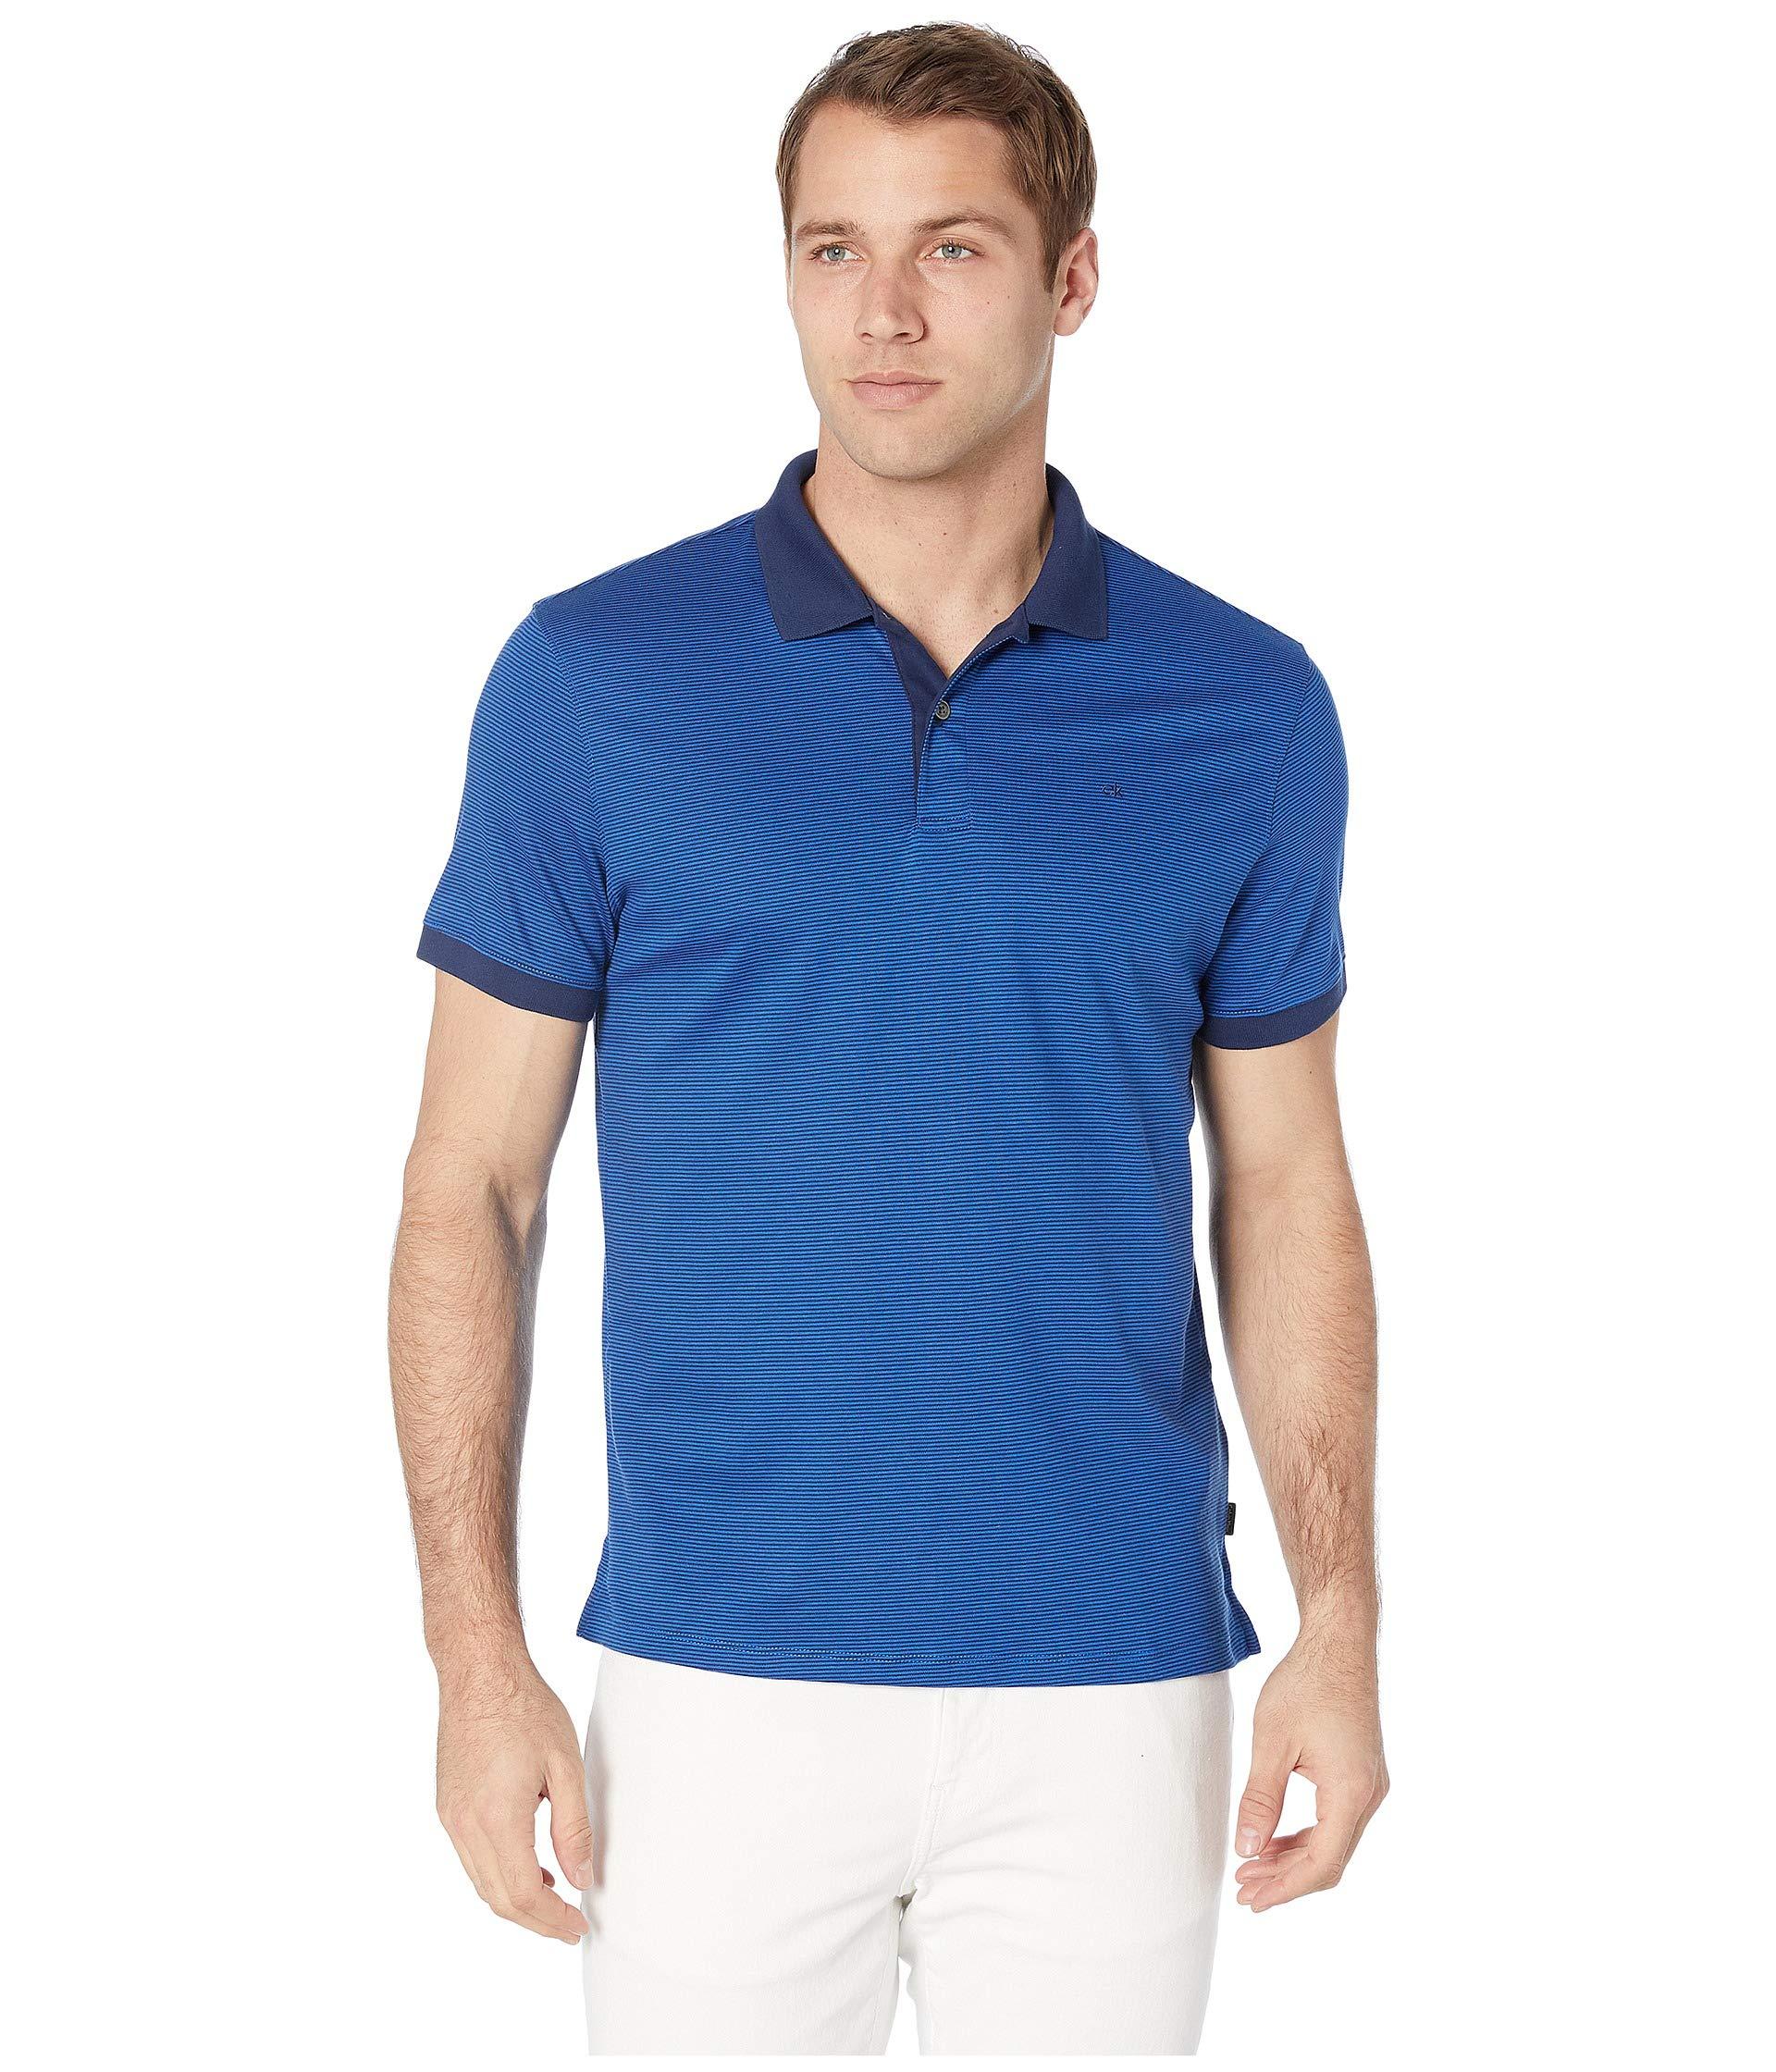 Calvin Klein The Liquid Touch Polo in Blue for Men - Lyst